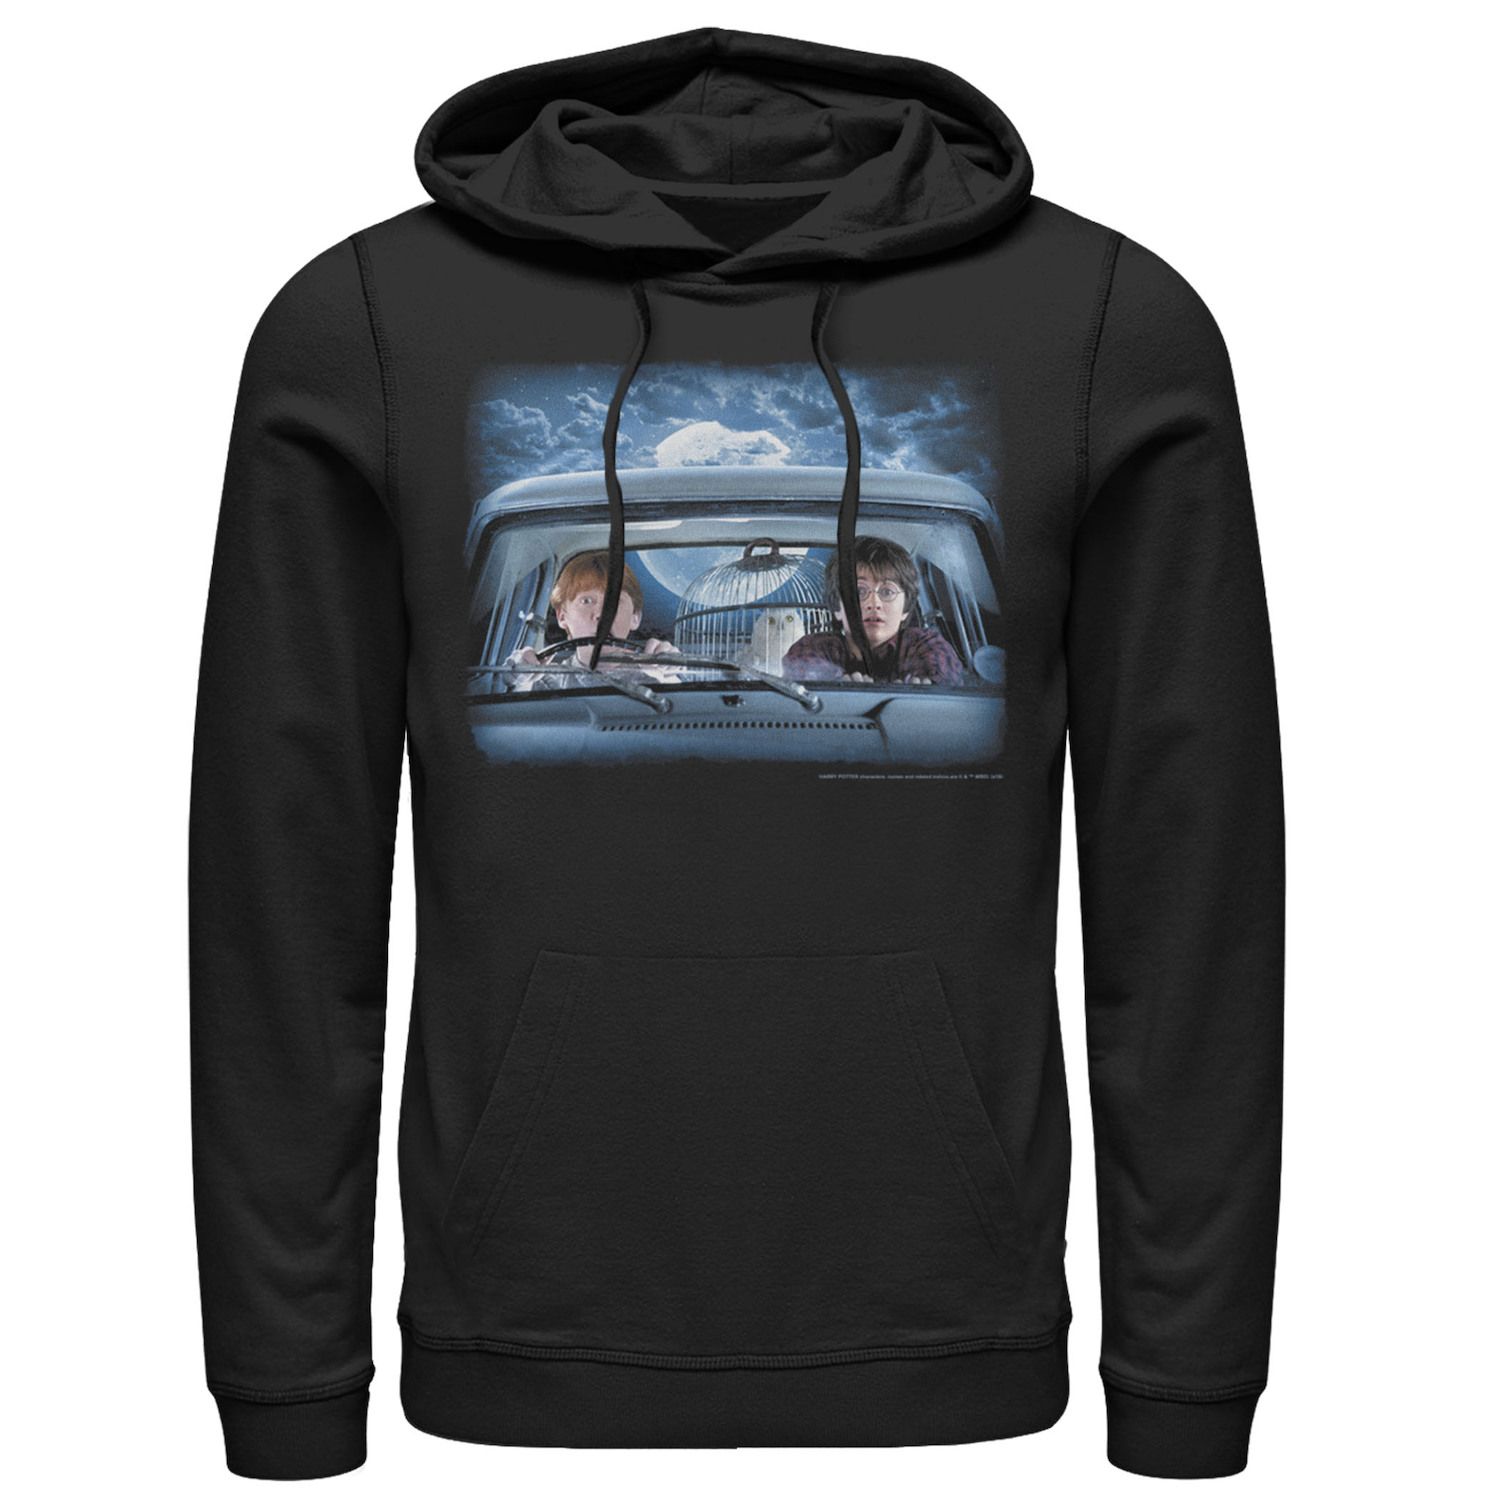 Image for Harry Potter Men's Ron & Harry In The Flying Car Hoodie at Kohl's.